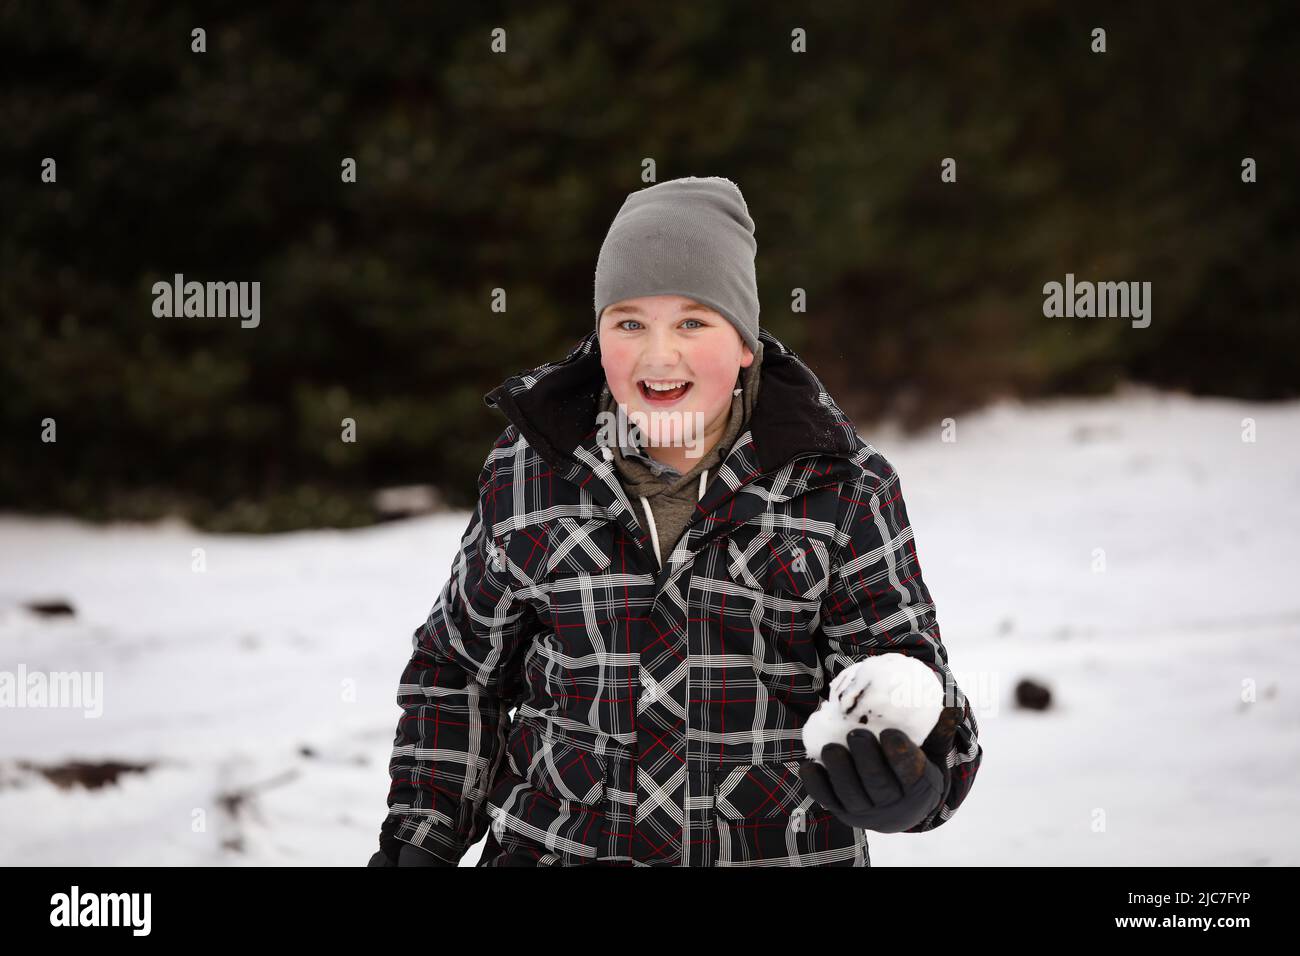 Boy in the snow with snow ball having snowball fight Stock Photo